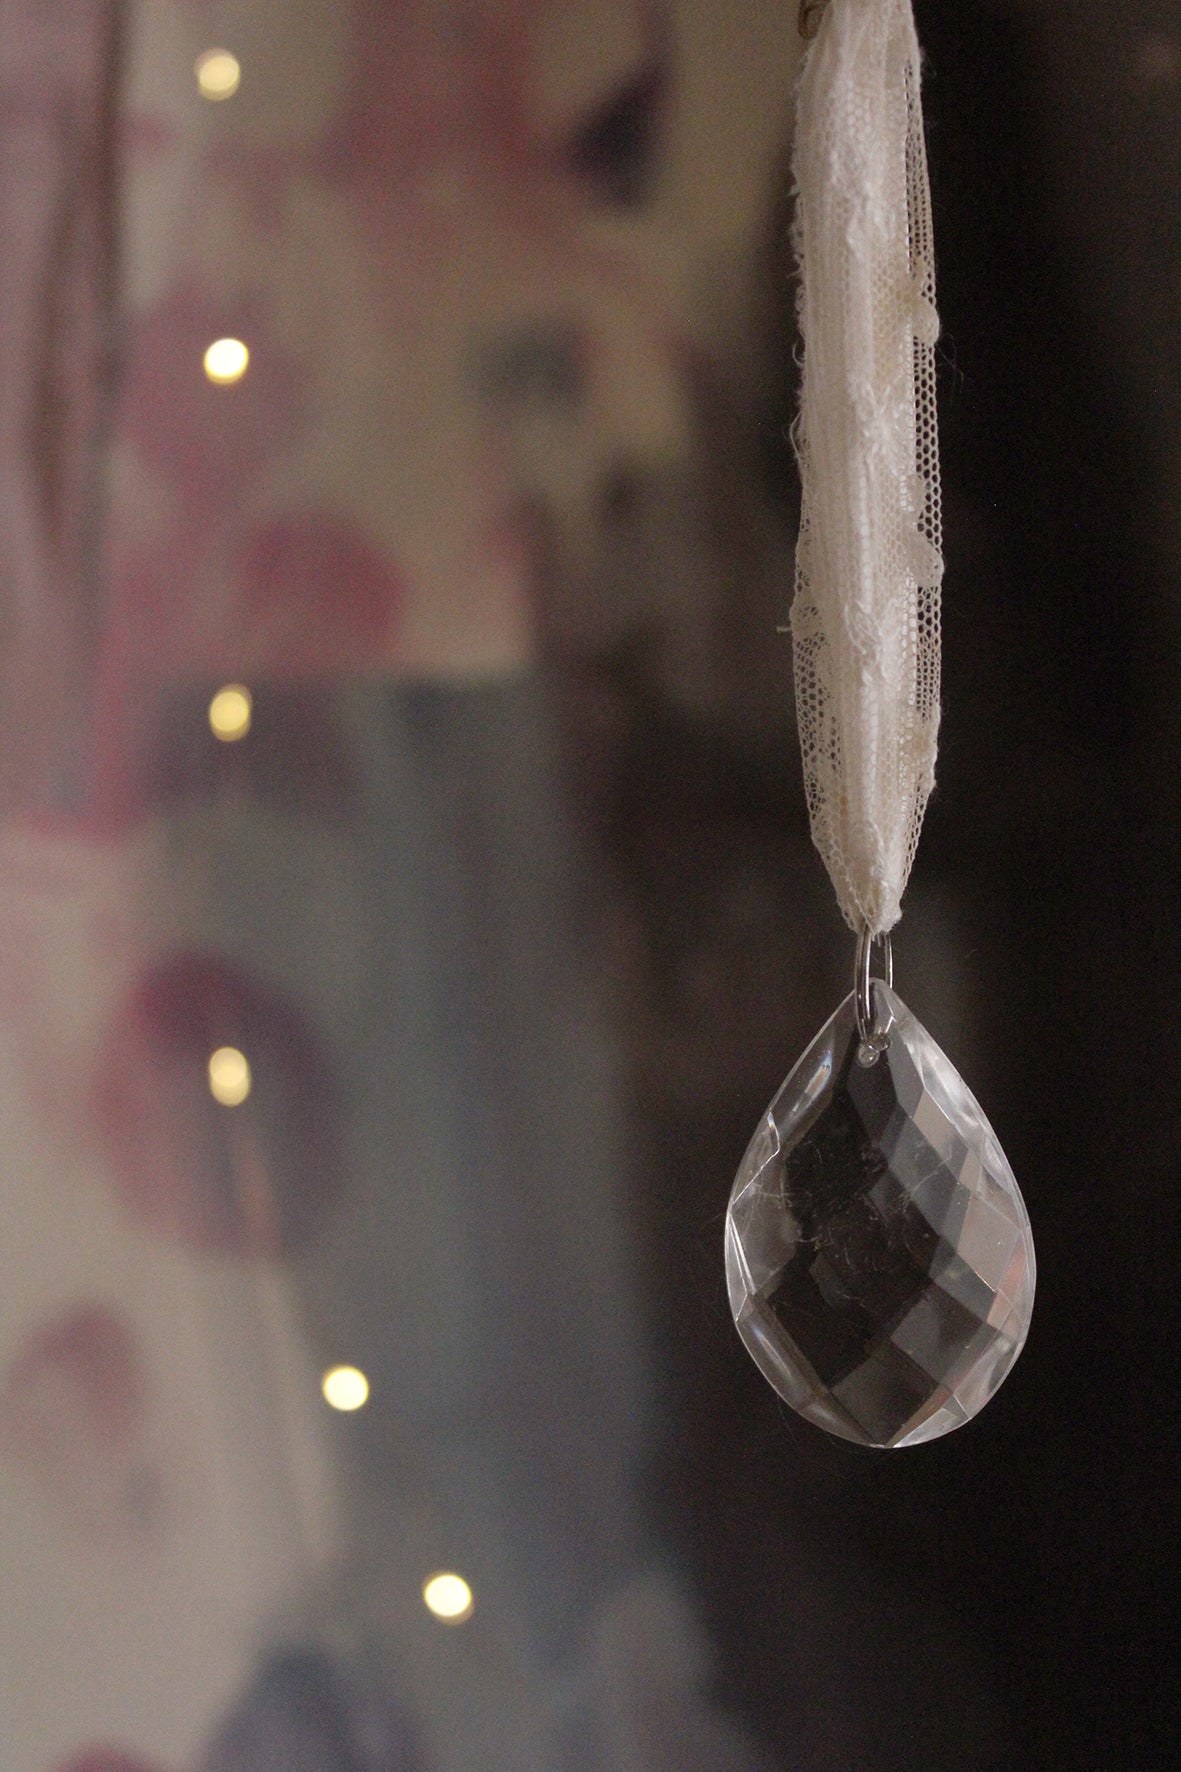 Antique Faceted Glass Chandelier Drop With A Warm White Silk & Lace Hanger